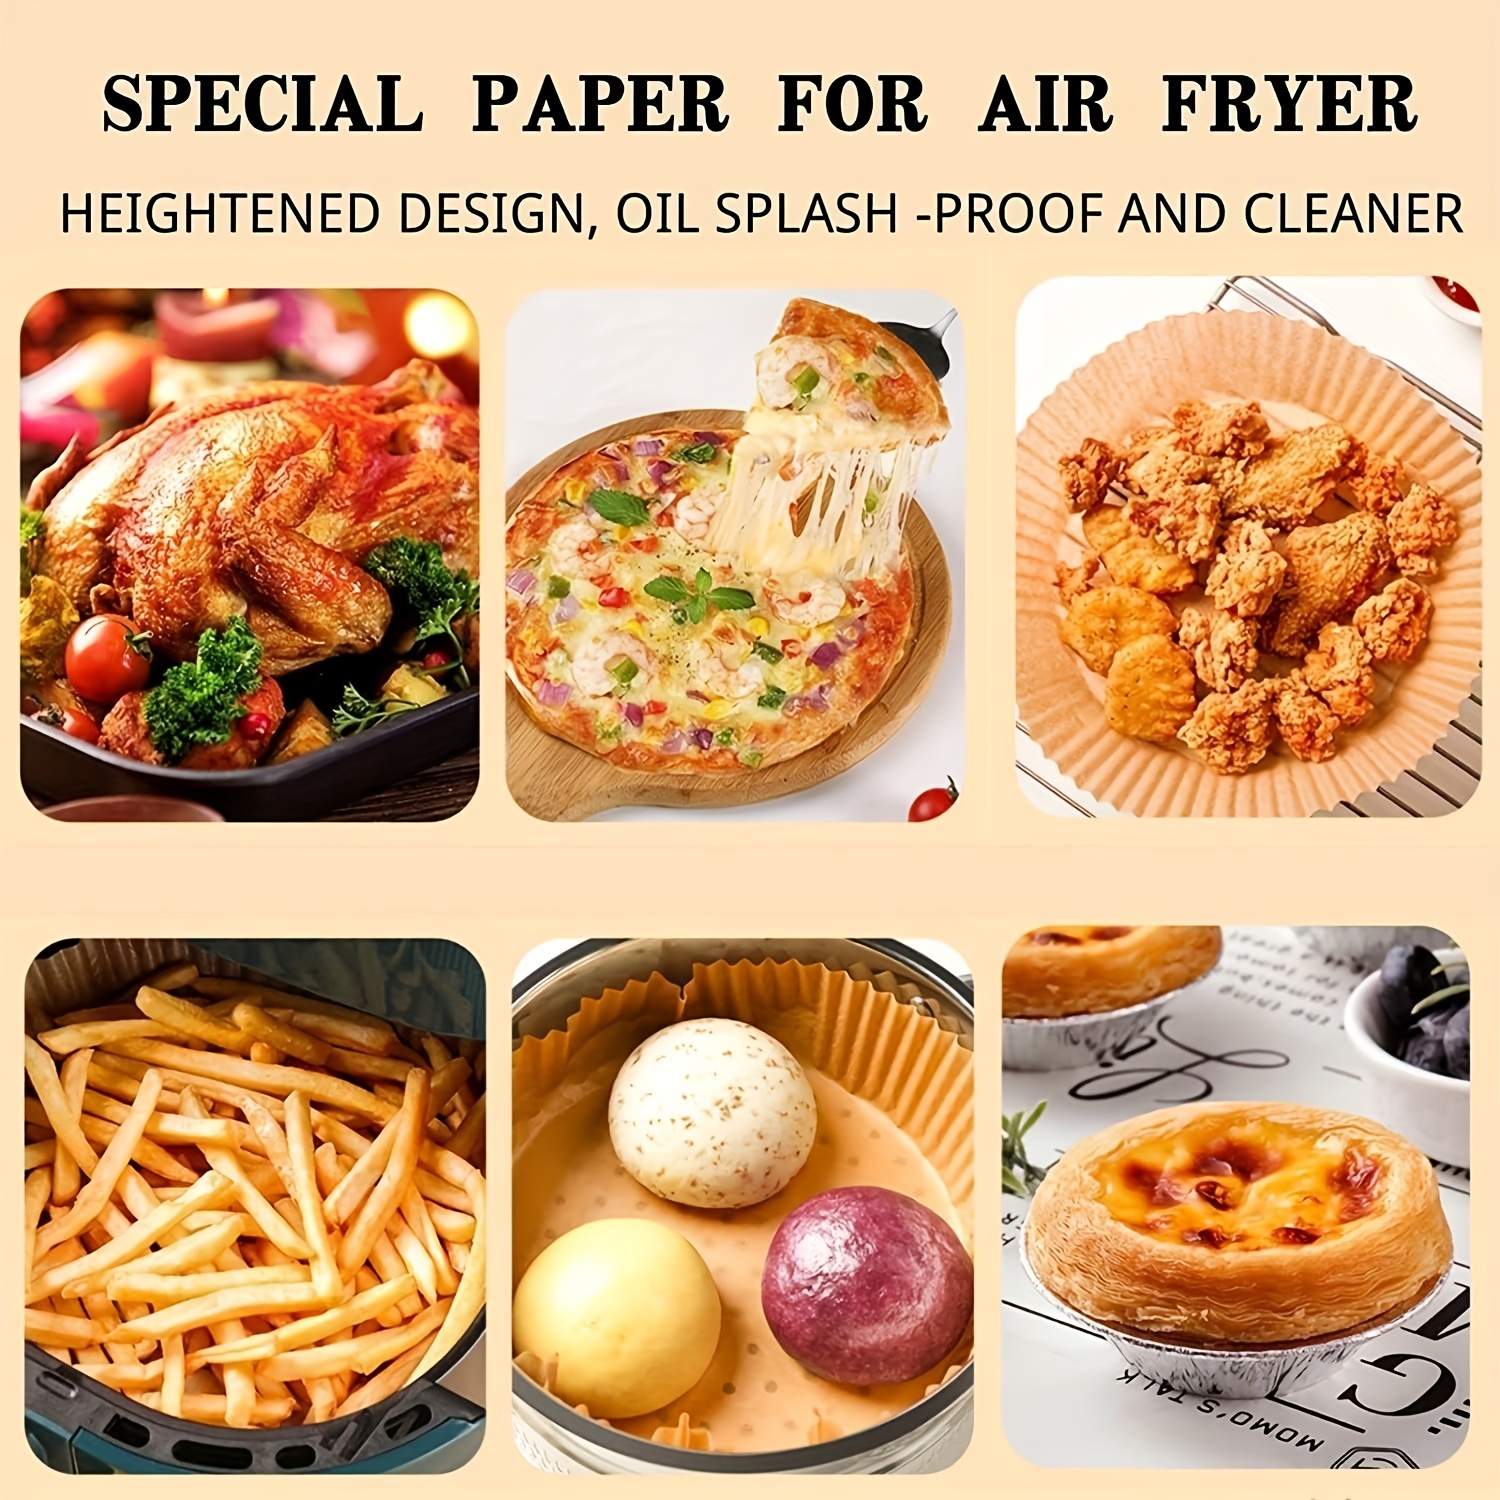 Wholesale Disposable Air Fryer Paper Liners: 100PCS 8 Inch Square Liners  for Air Fryer, Grease and Water Proof Non-Stick Basket Parchment Paper -  China Air Fryer Paper and Air Fryer Paper Liners